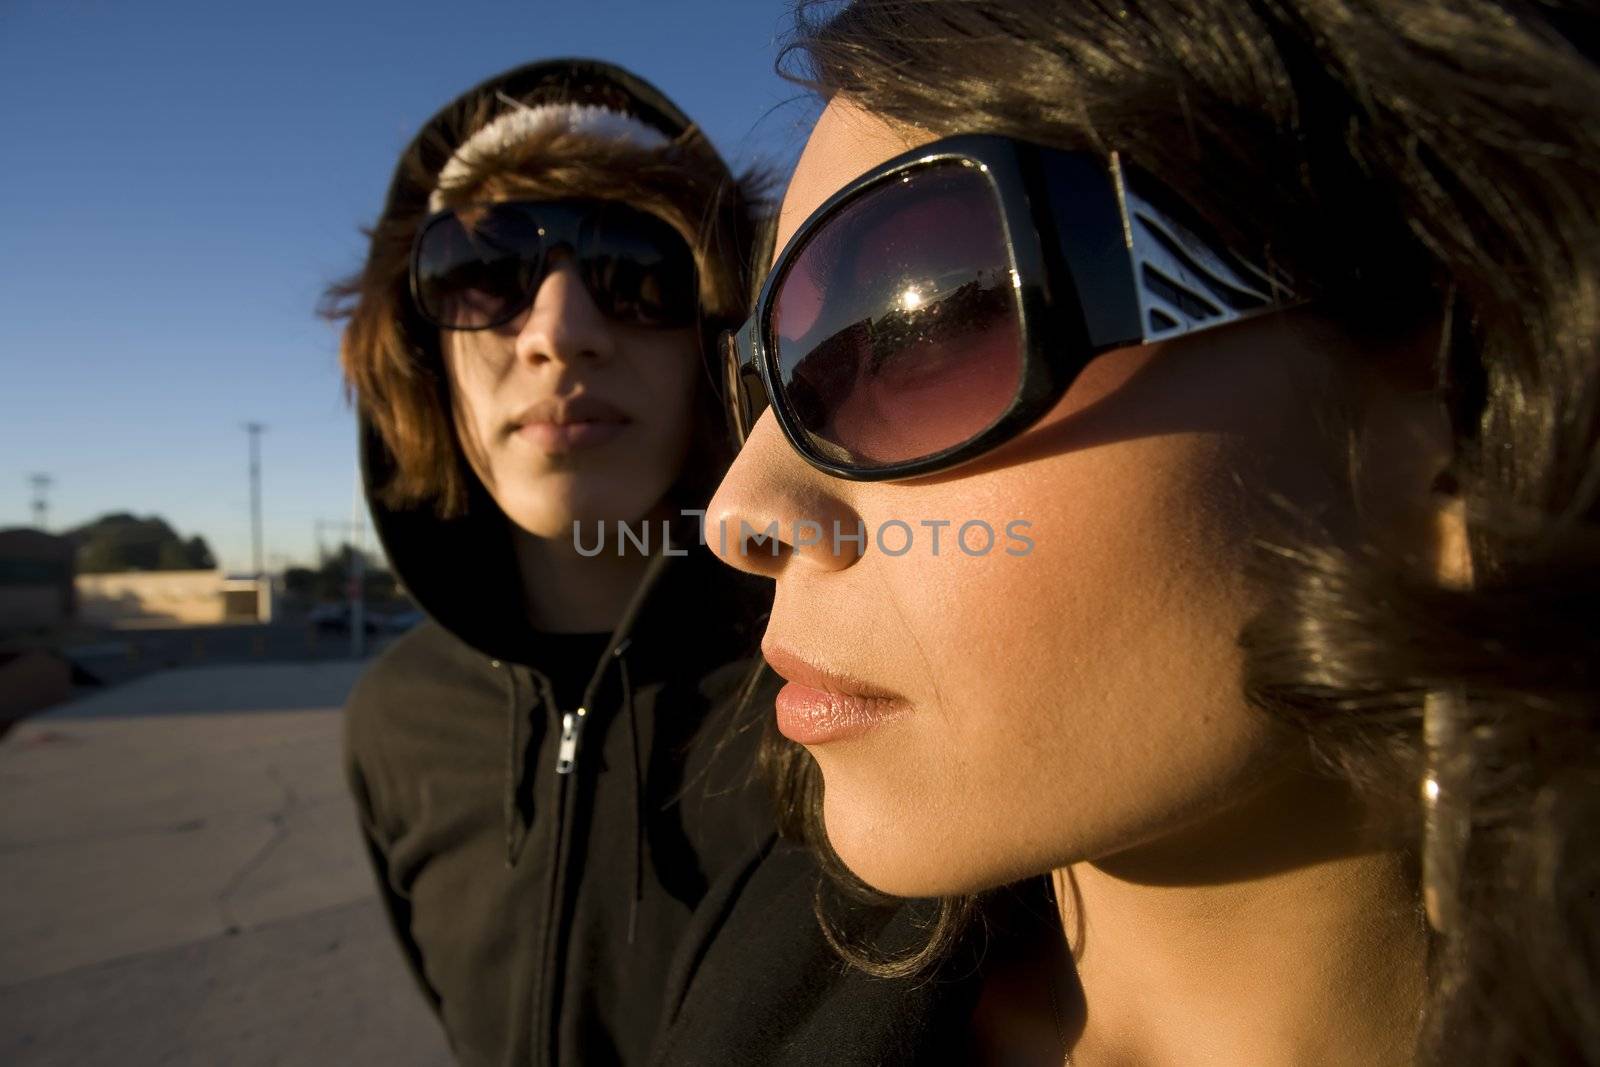 Beautiful woman and handsome young man in an urban setting